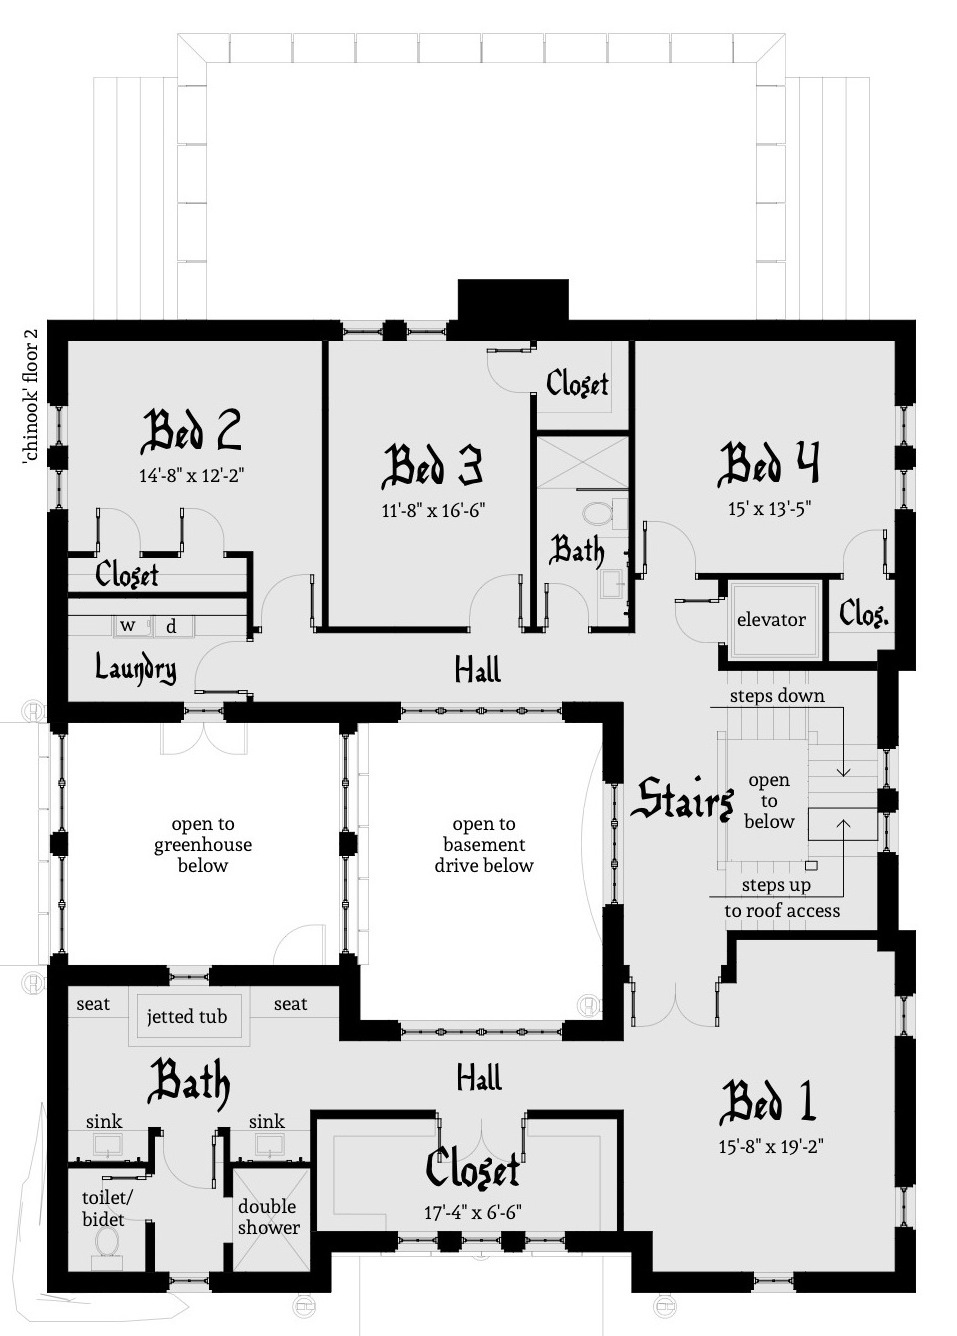 Castle Tower Home with Basement Garage. Tyree House Plans